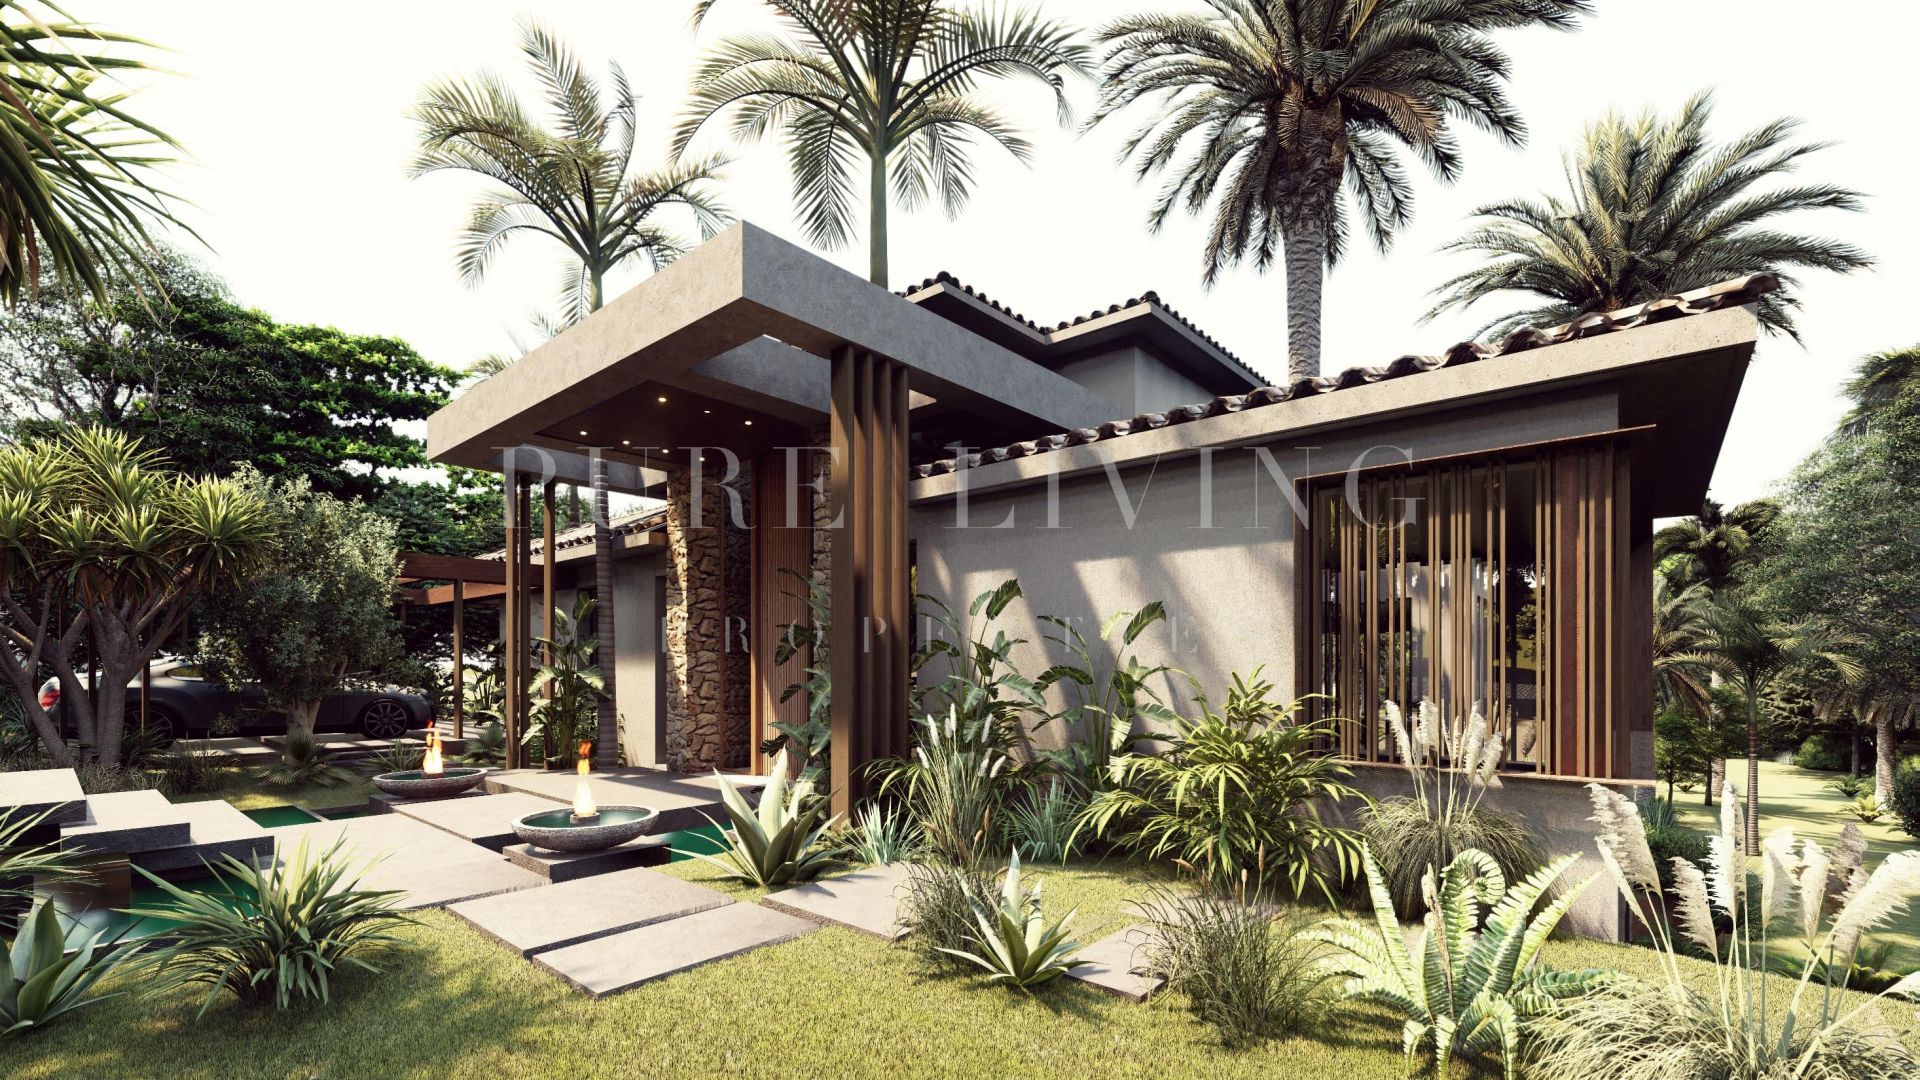 New Balinese style luxury villa for sale, with five bedrooms in the exclusive Golden Mile.